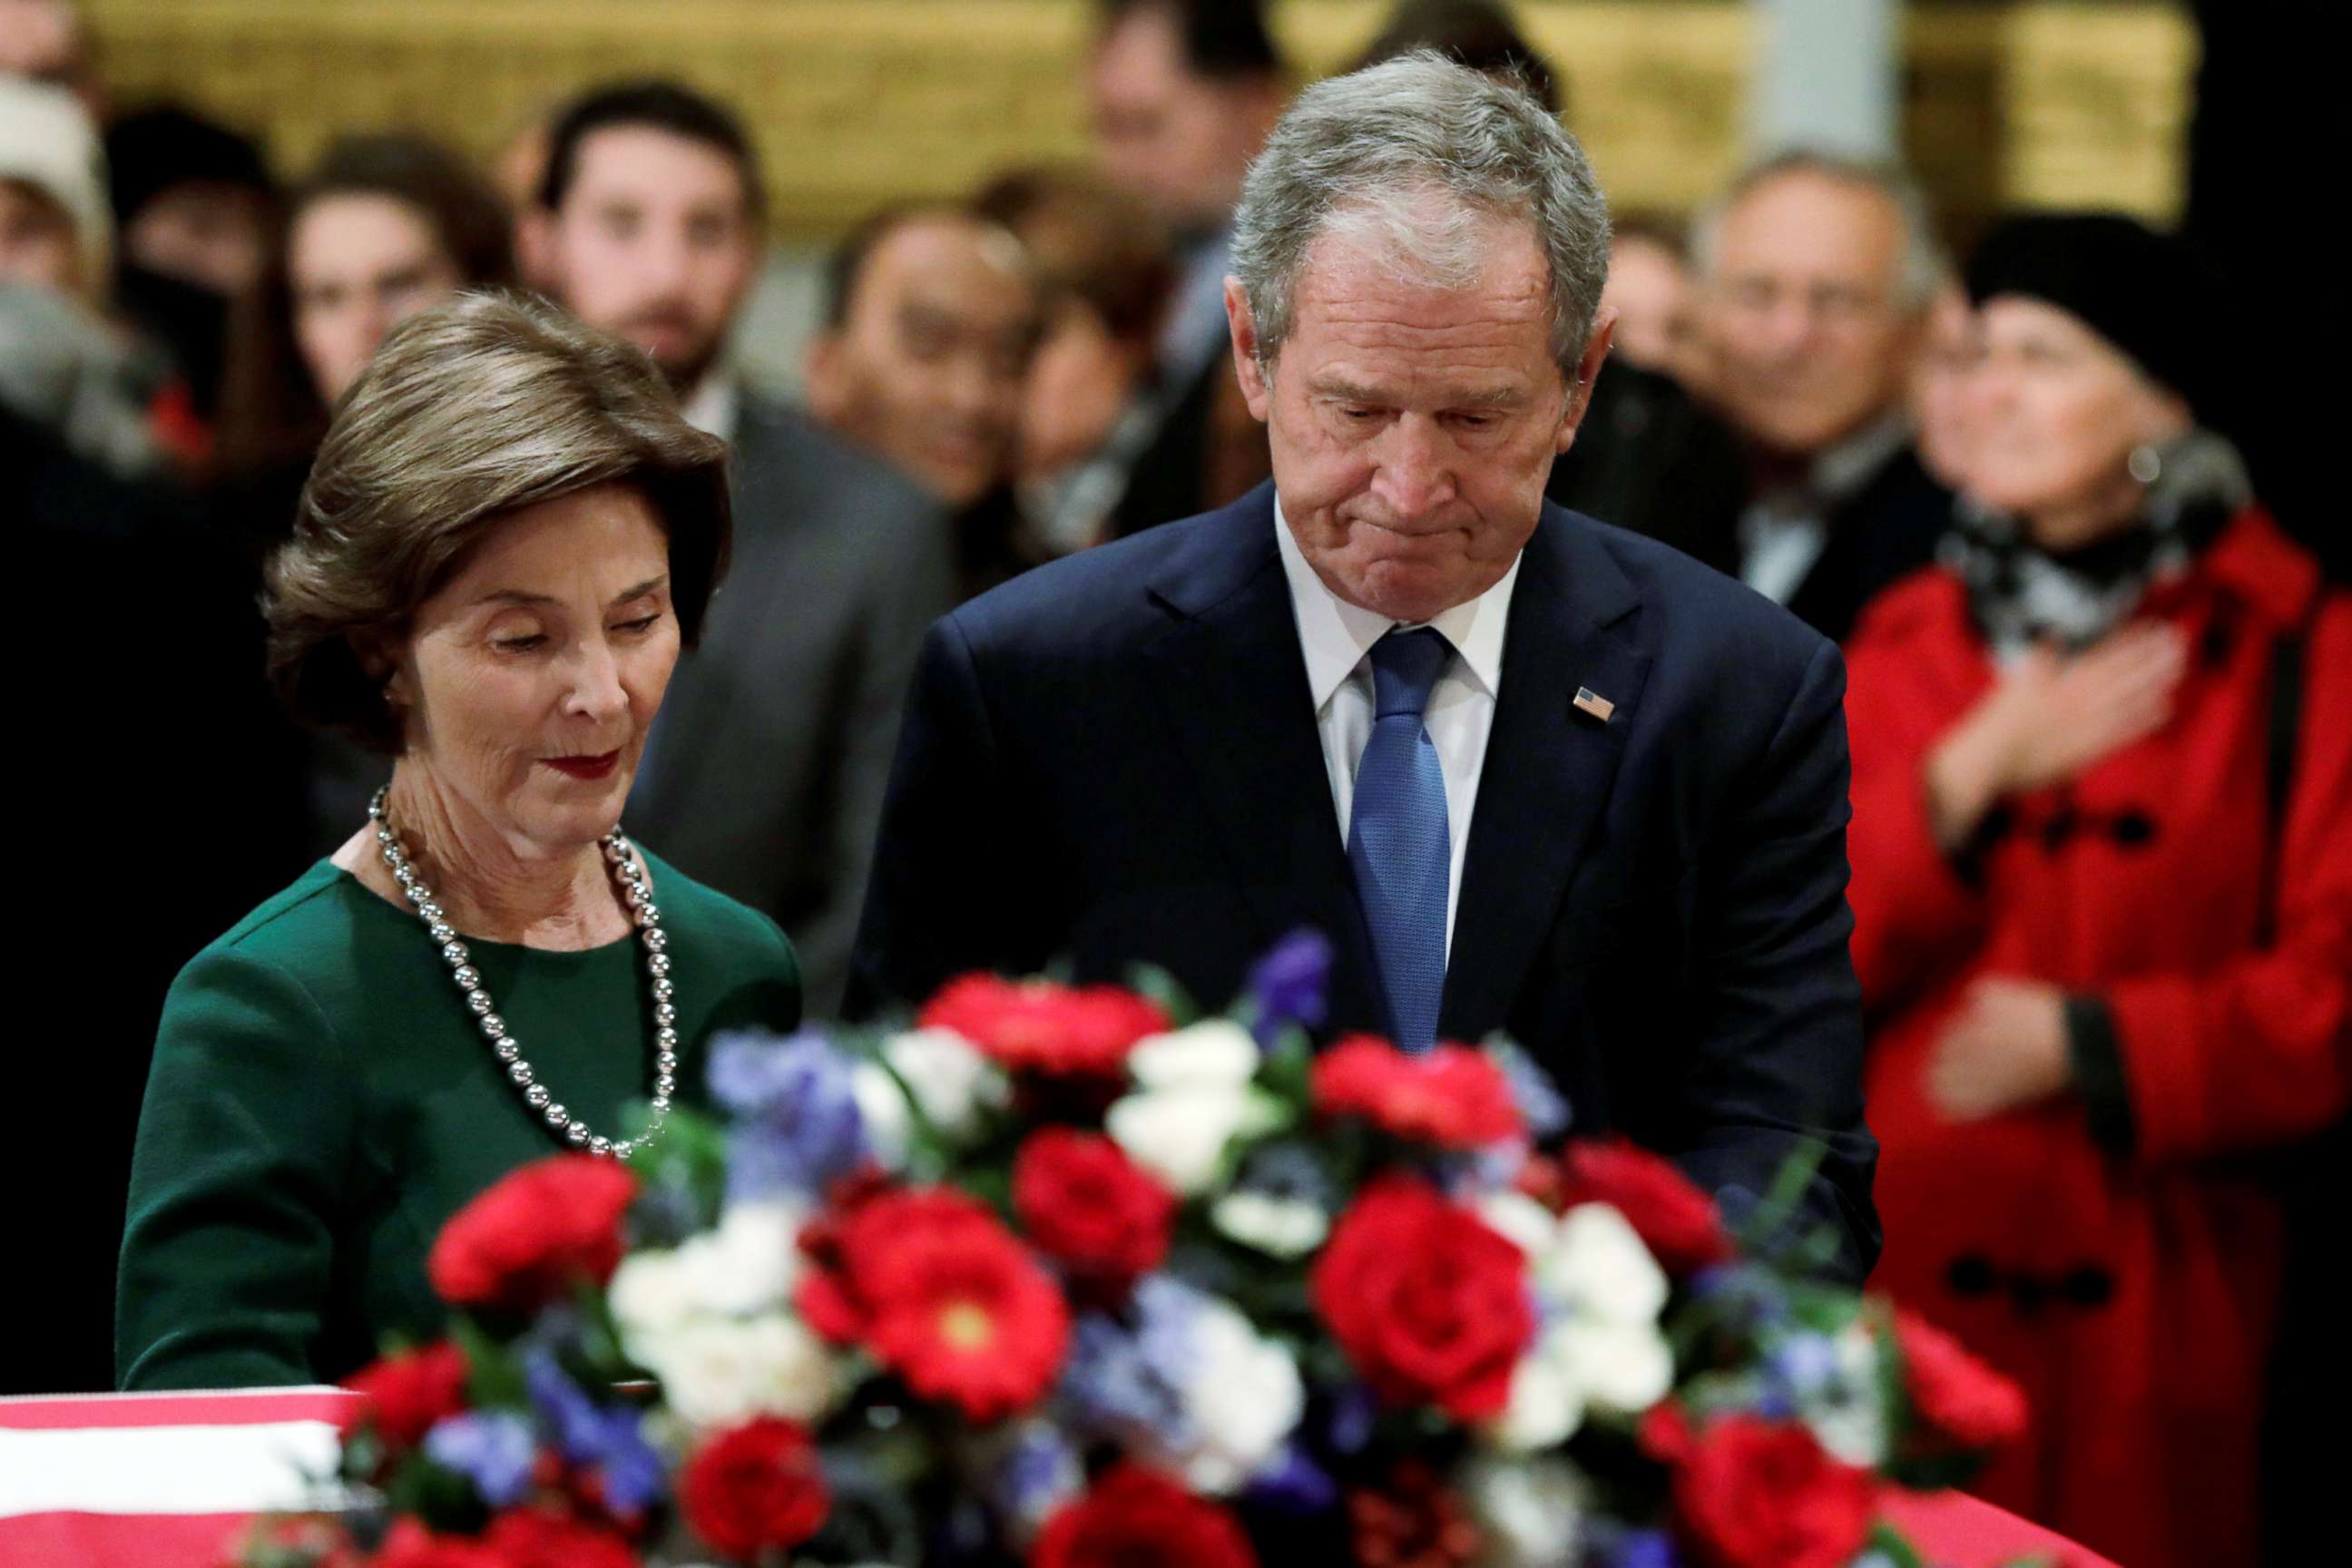 PHOTO: Former President George W. Bush and former First Lady Laura Bush stand at the flag-draped casket of former U.S. President George H.W. Bush as it lies in state inside the U.S. Capitol Rotunda in Washington, Dec. 4, 2018.